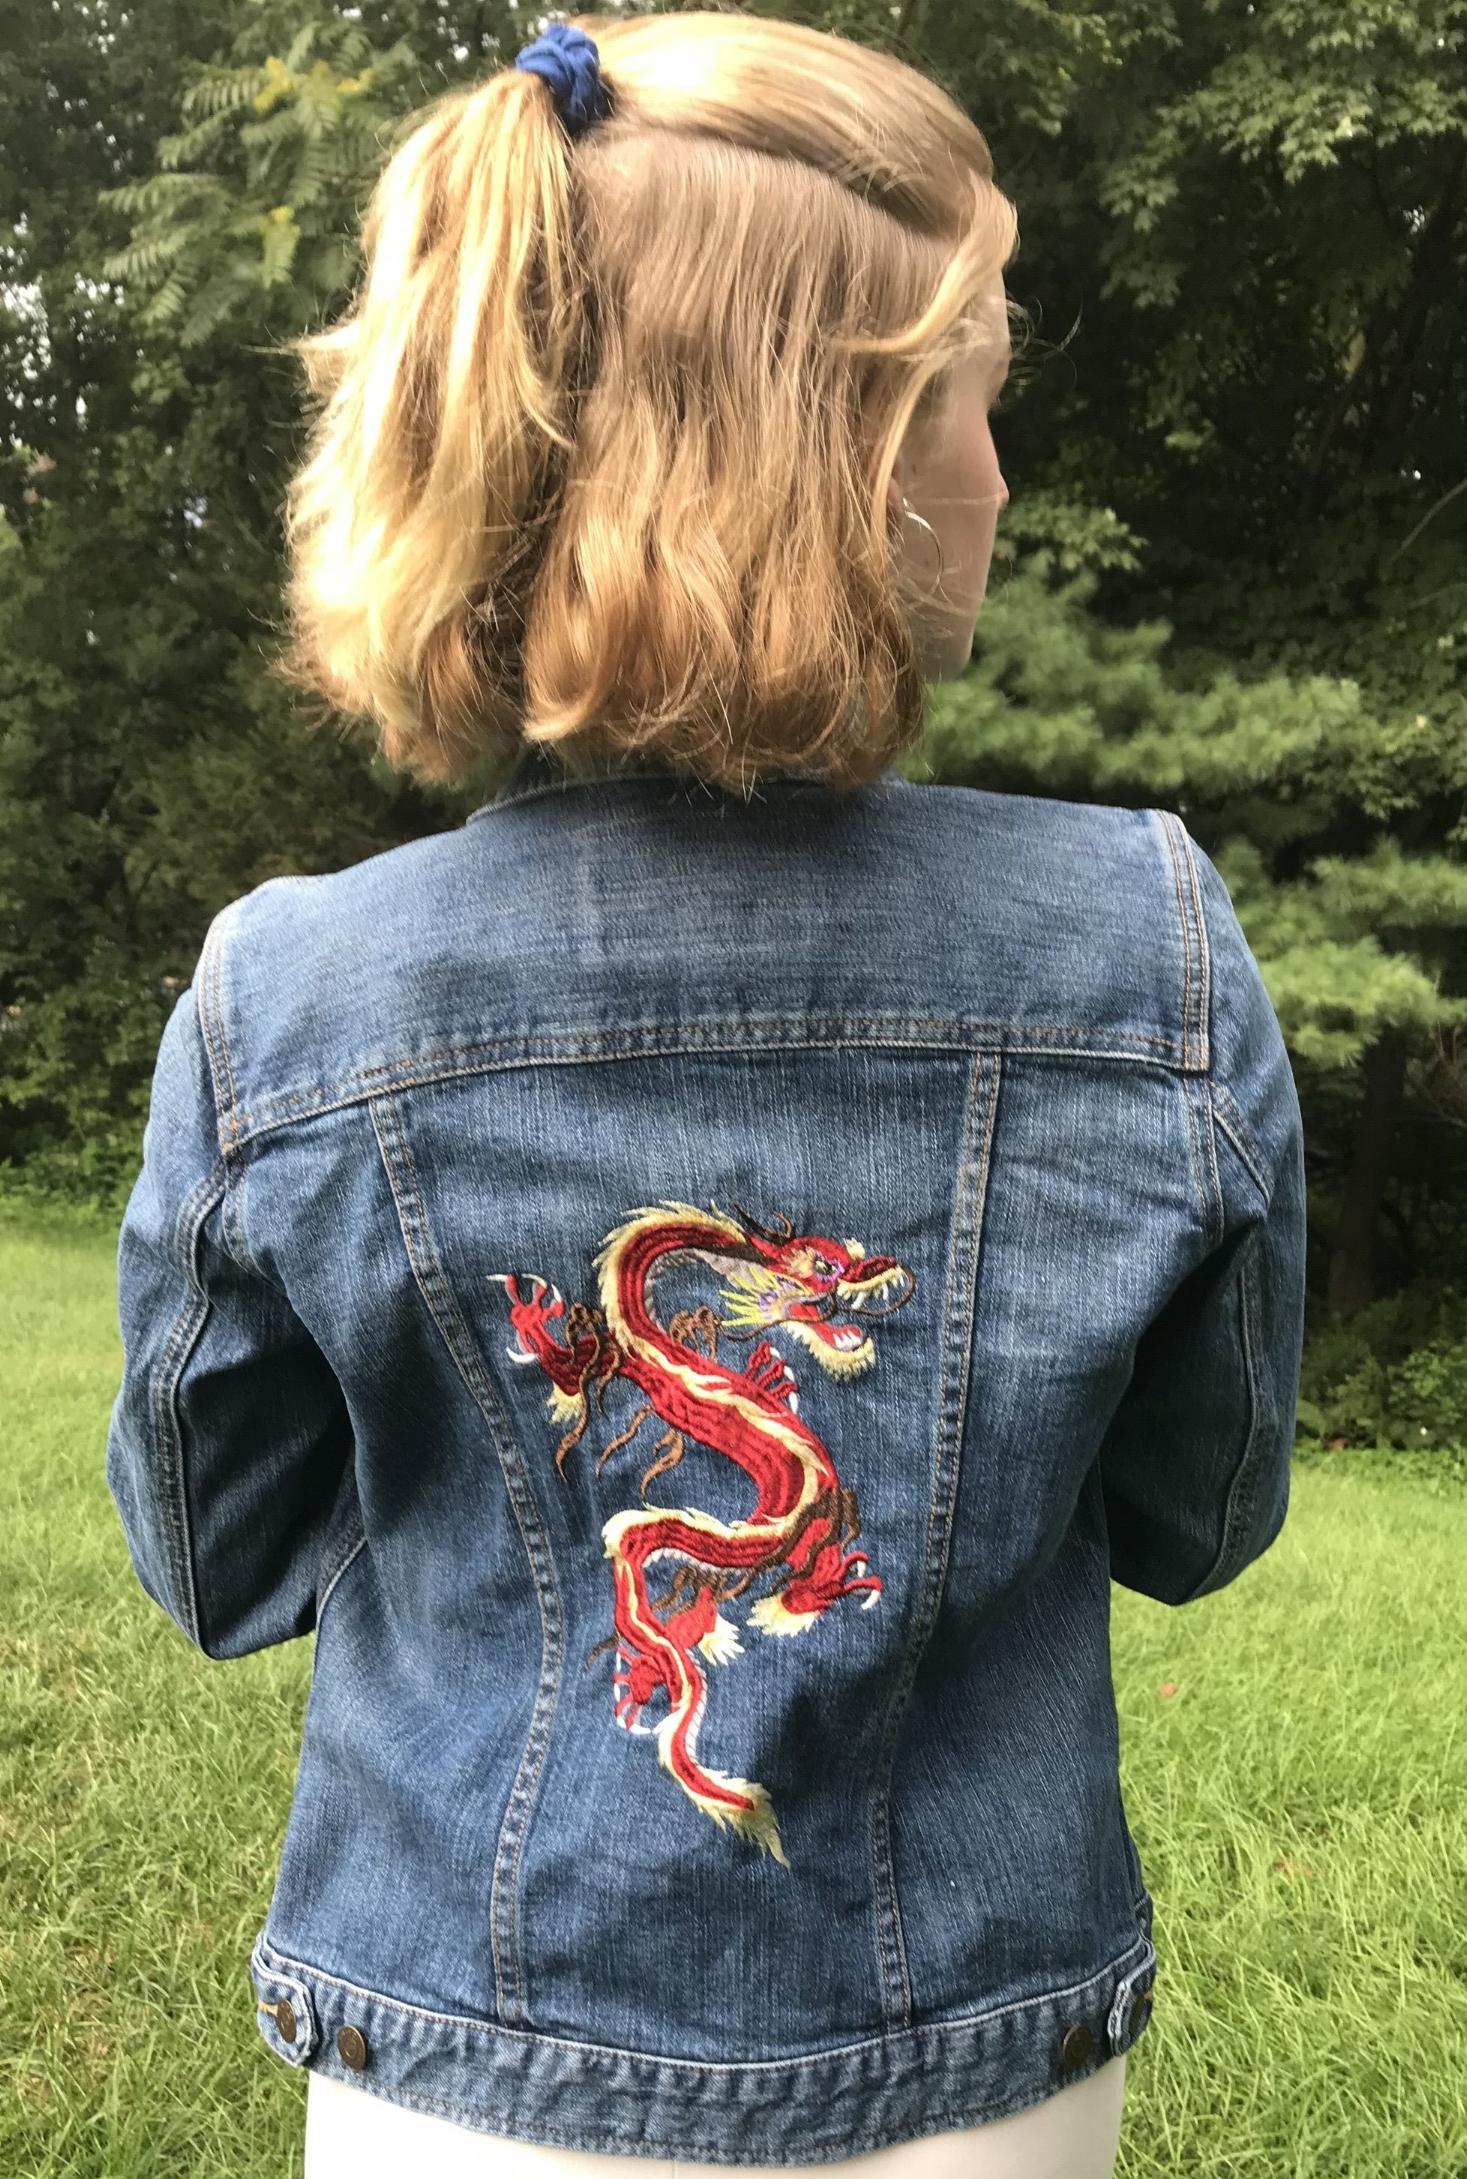 Embroidered jacket with Dragon design